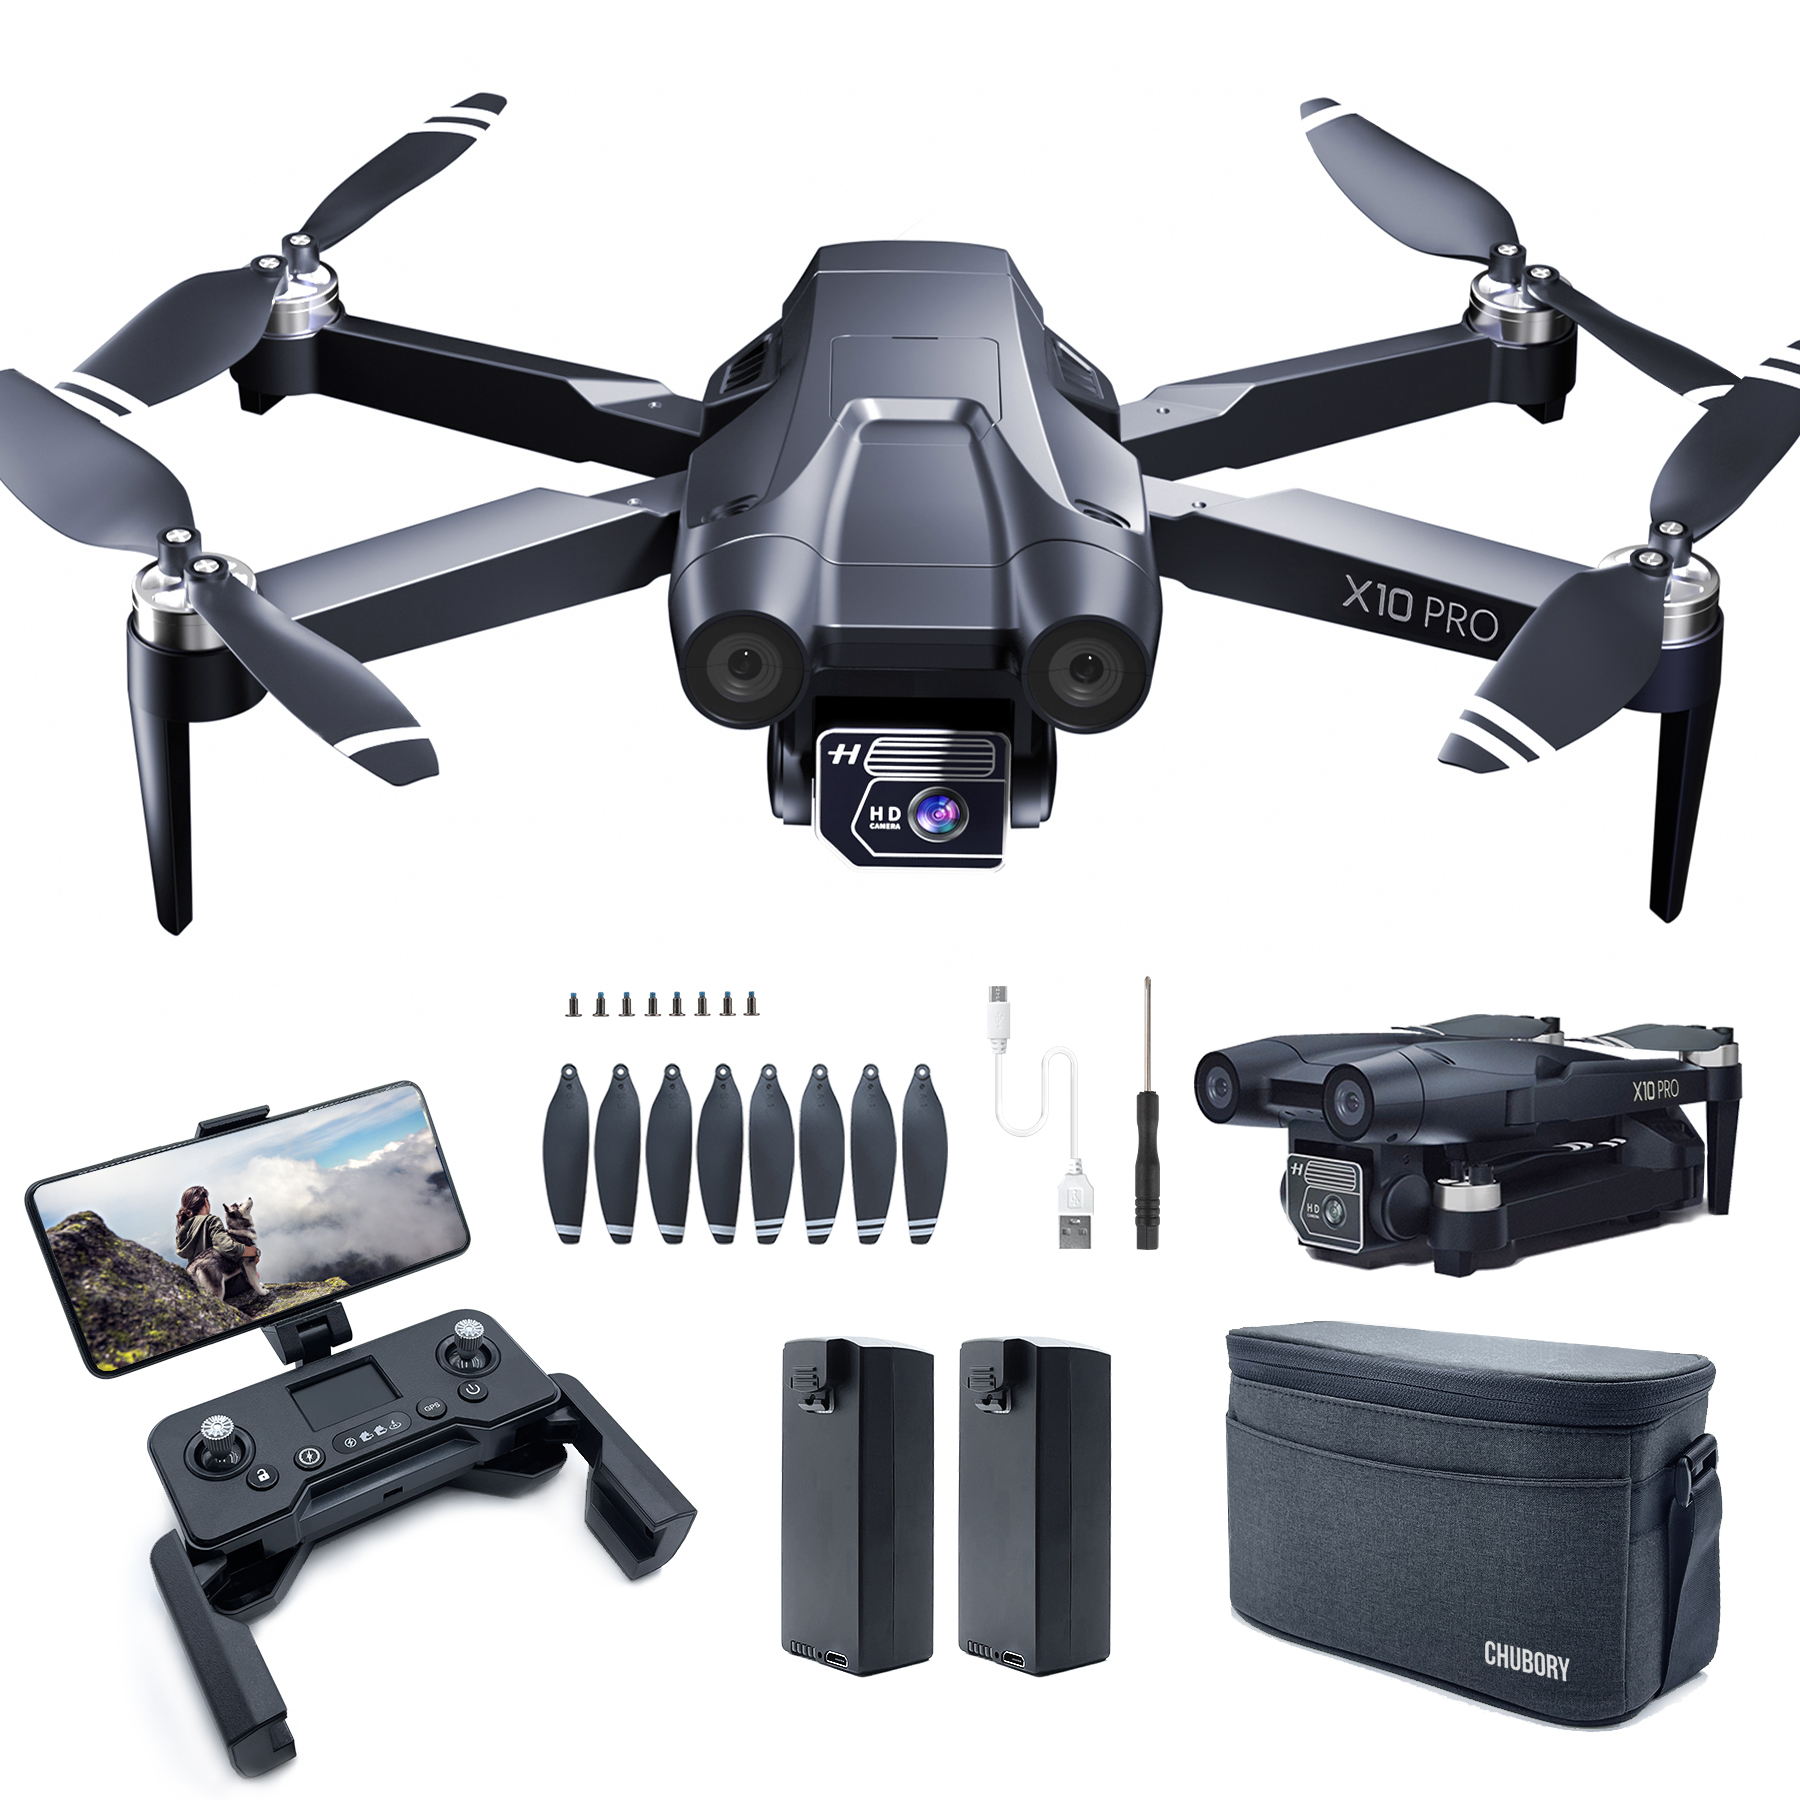 CHUBORY X10 GPS Drone with Camera for Adults 4K UHD, 56 Min Long Flight Time,3280 FT Long Control Range, Auto Return, Follow Me, Brushless Motor, 5G FPV RC Quadcopter for Beginners(<0.55bl)